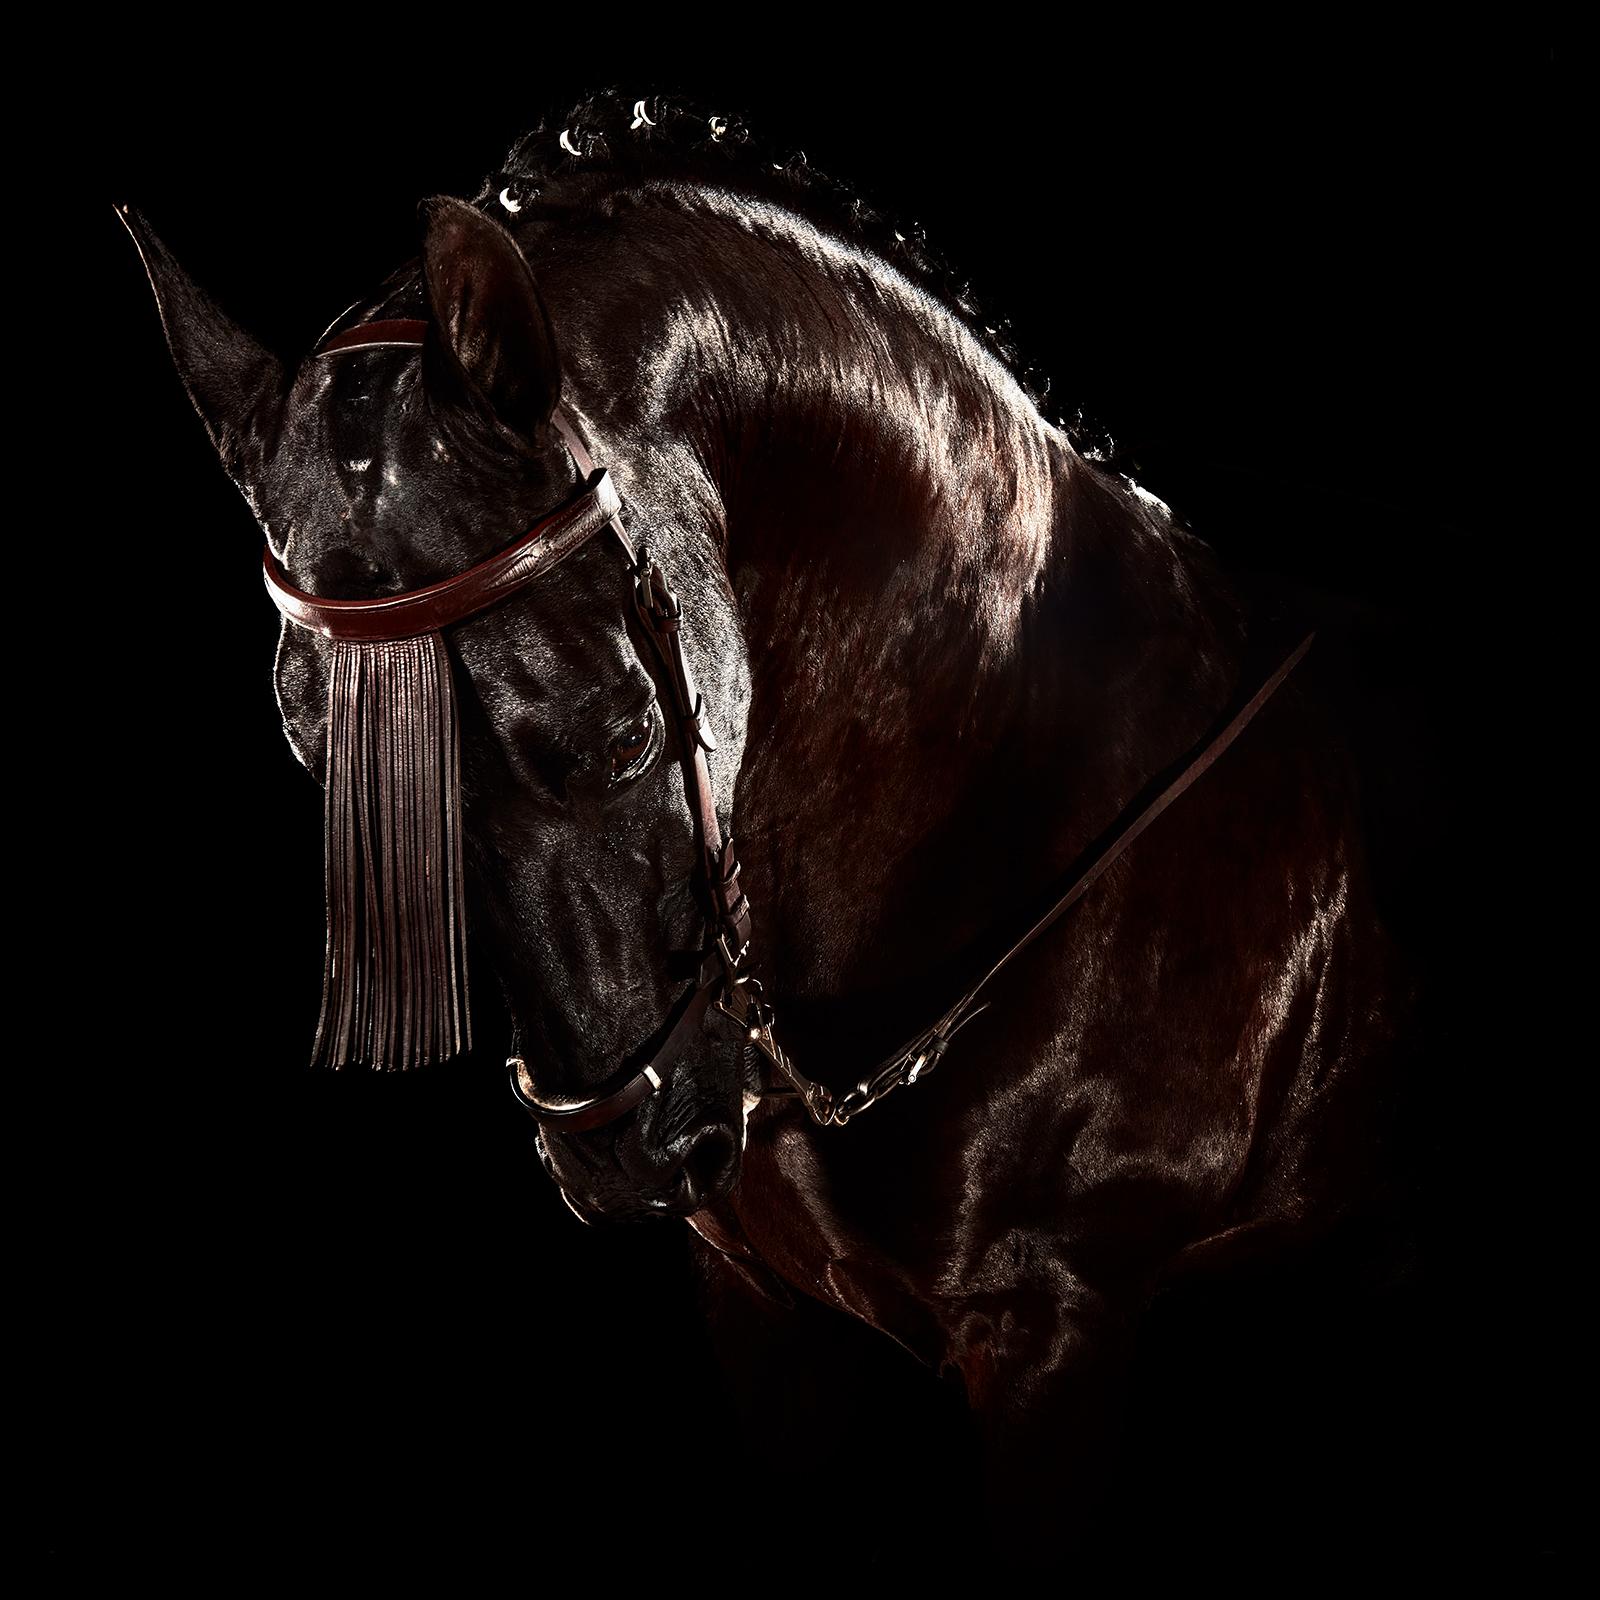 Horse 4 - Signed limited edition archival pigment print, Edition of 5, square